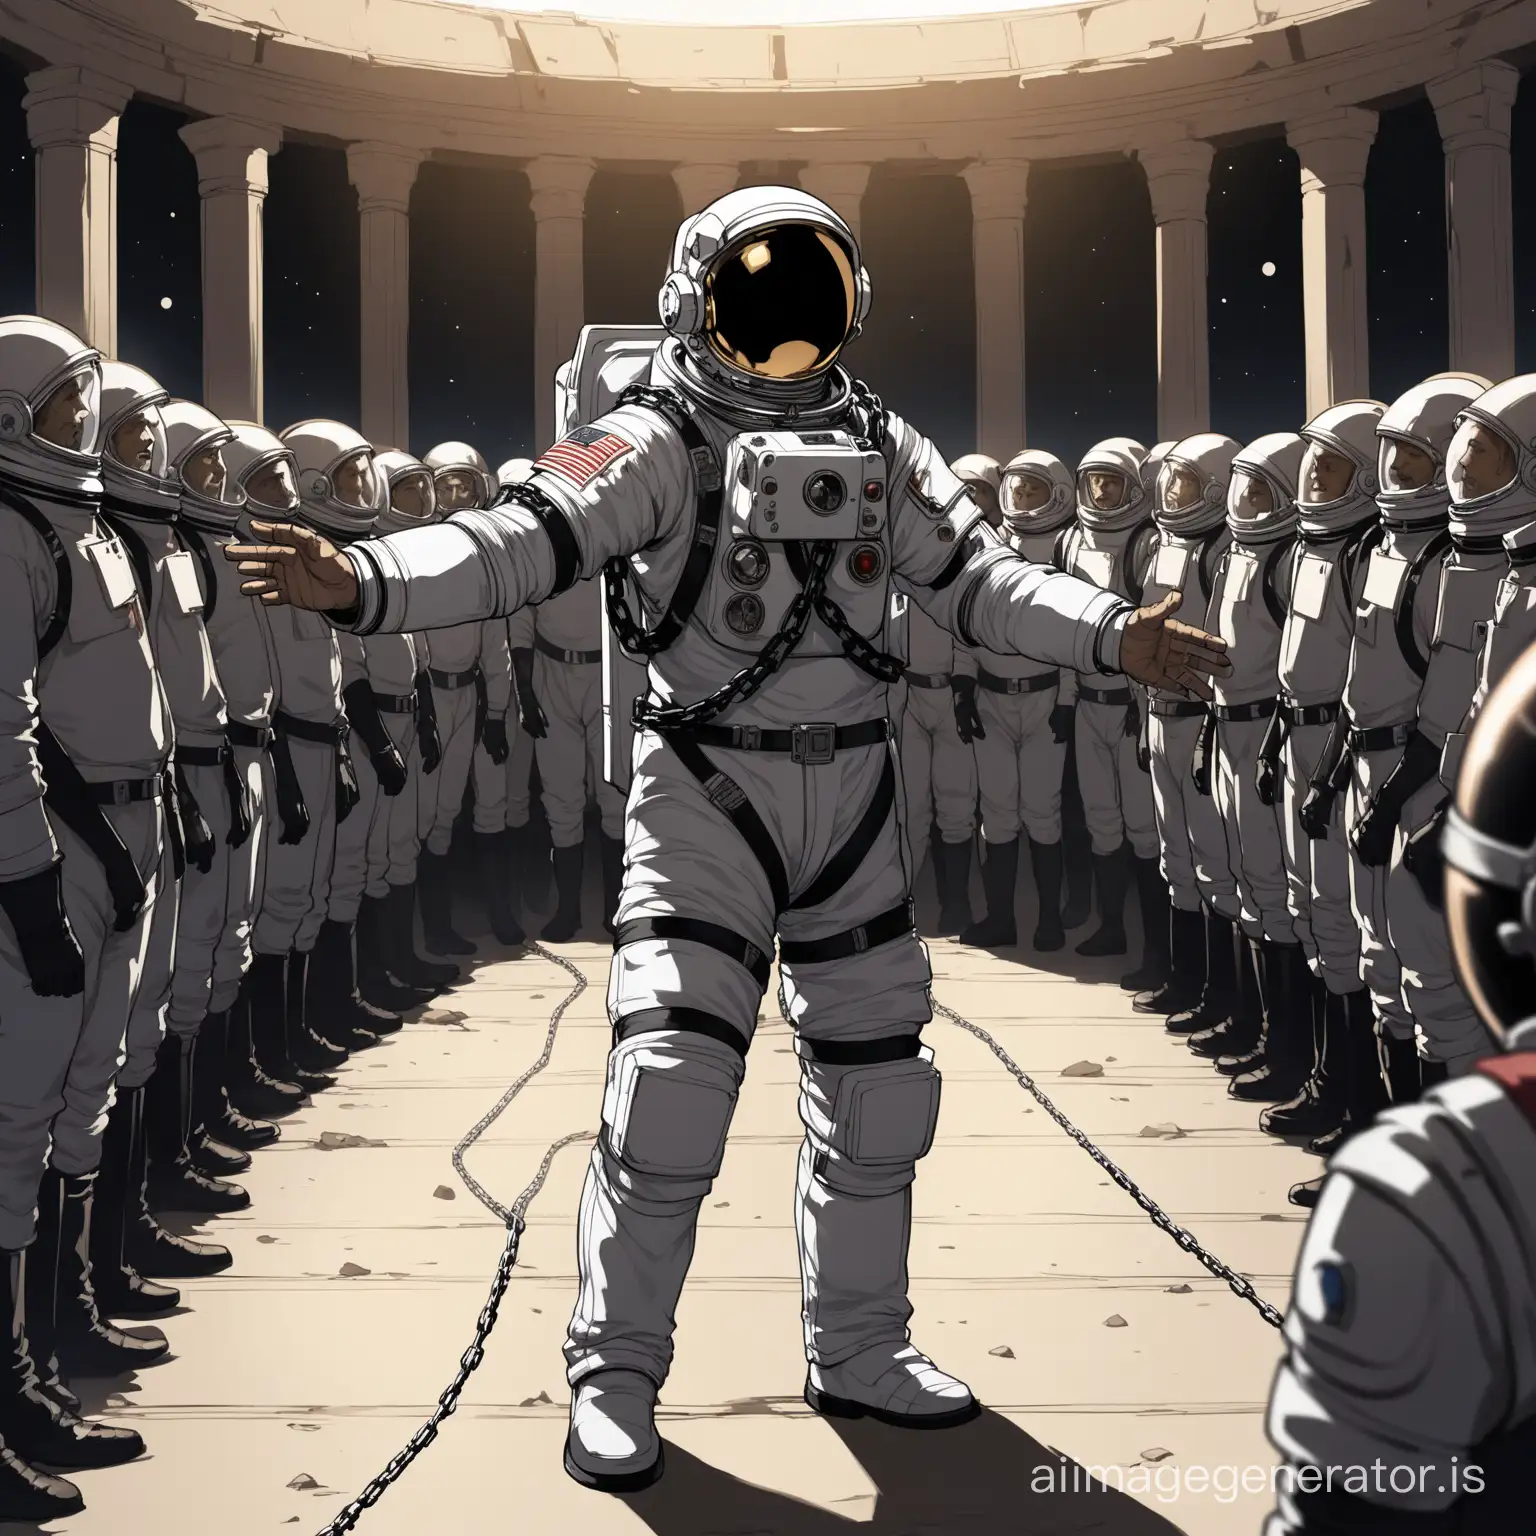 The tyrant astronaut gives orders with a hand. In the background, people enslaved in chains